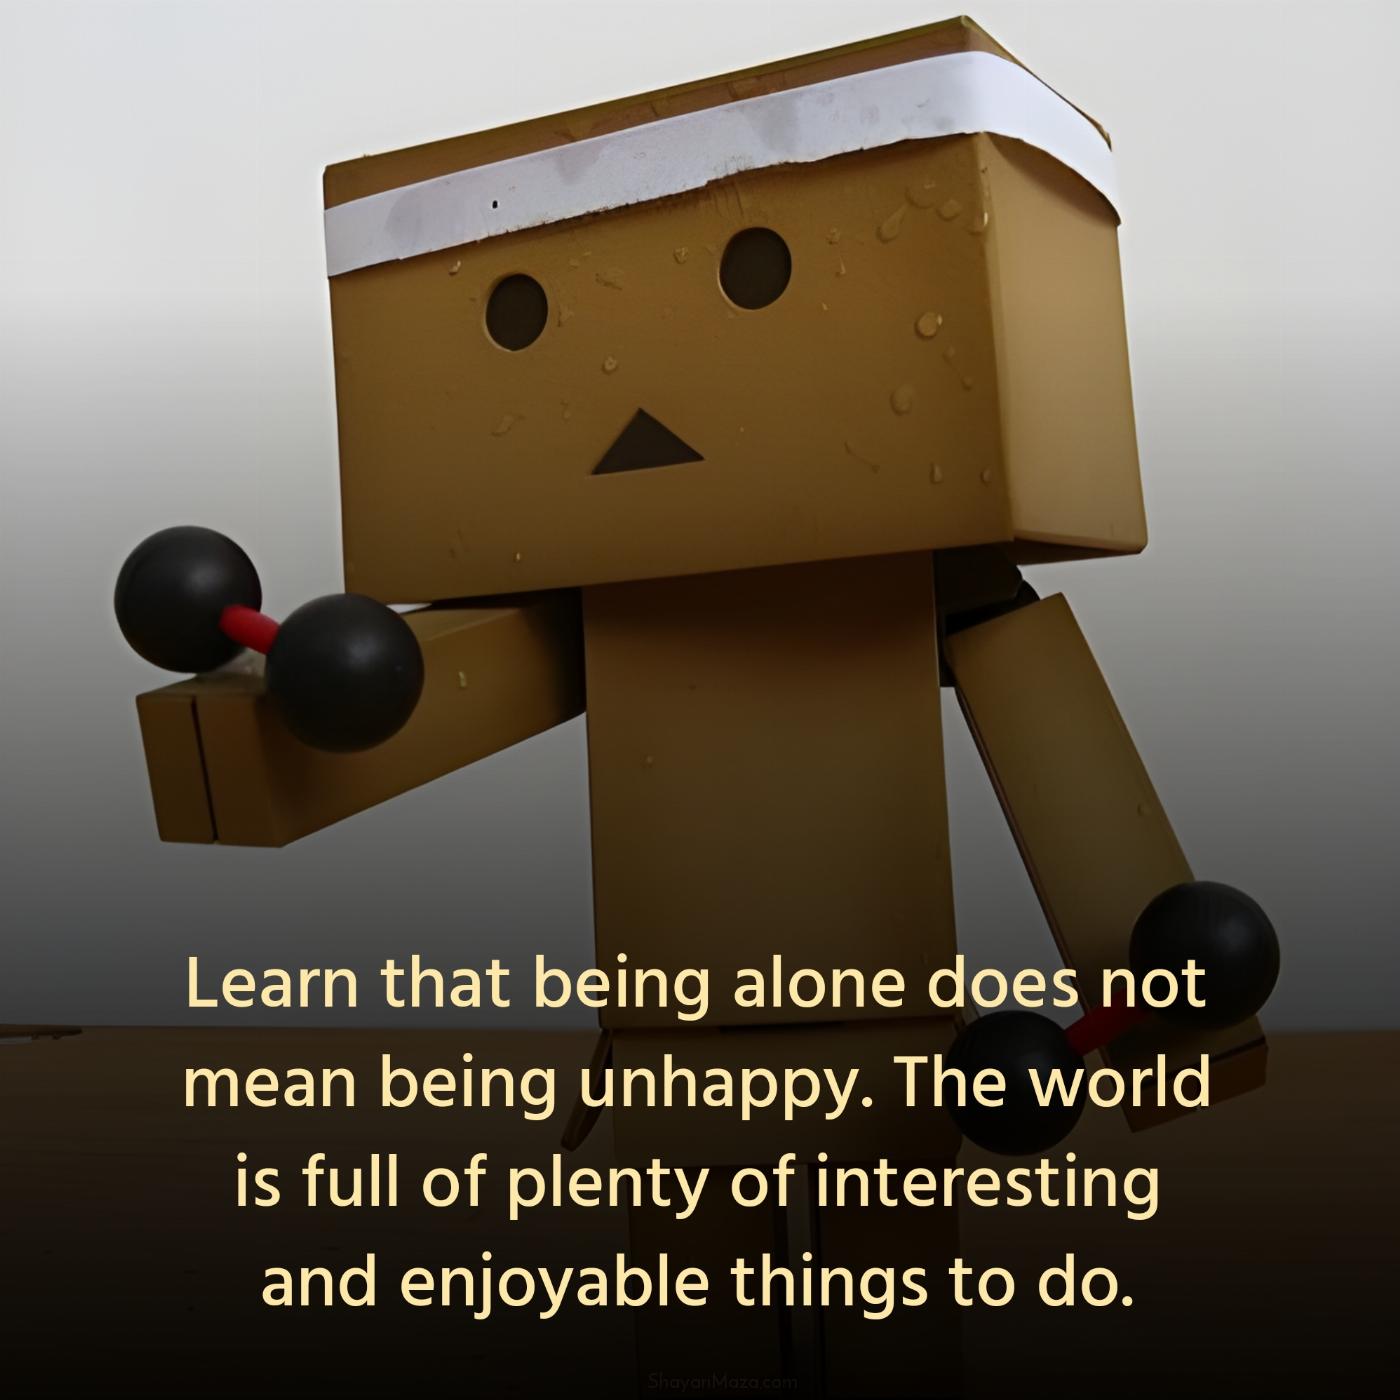 Learn that being alone does not mean being unhappy